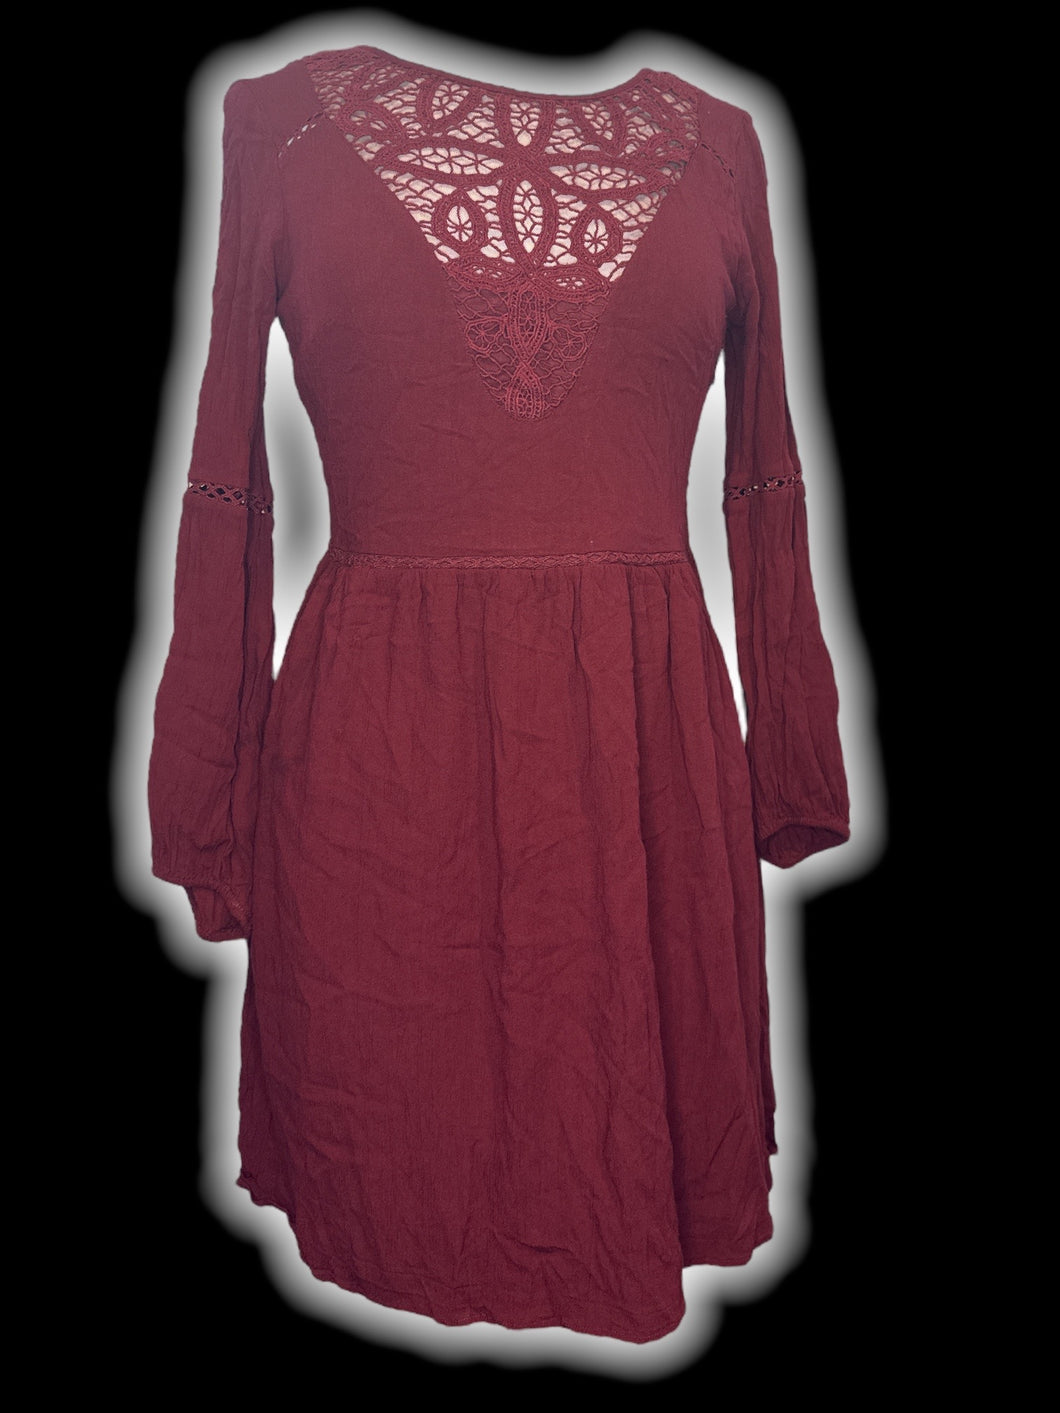 S Maroon long sleeve textured dress w/ lace accent on front back & sleeves, braided waist, inner lining, & side zipper